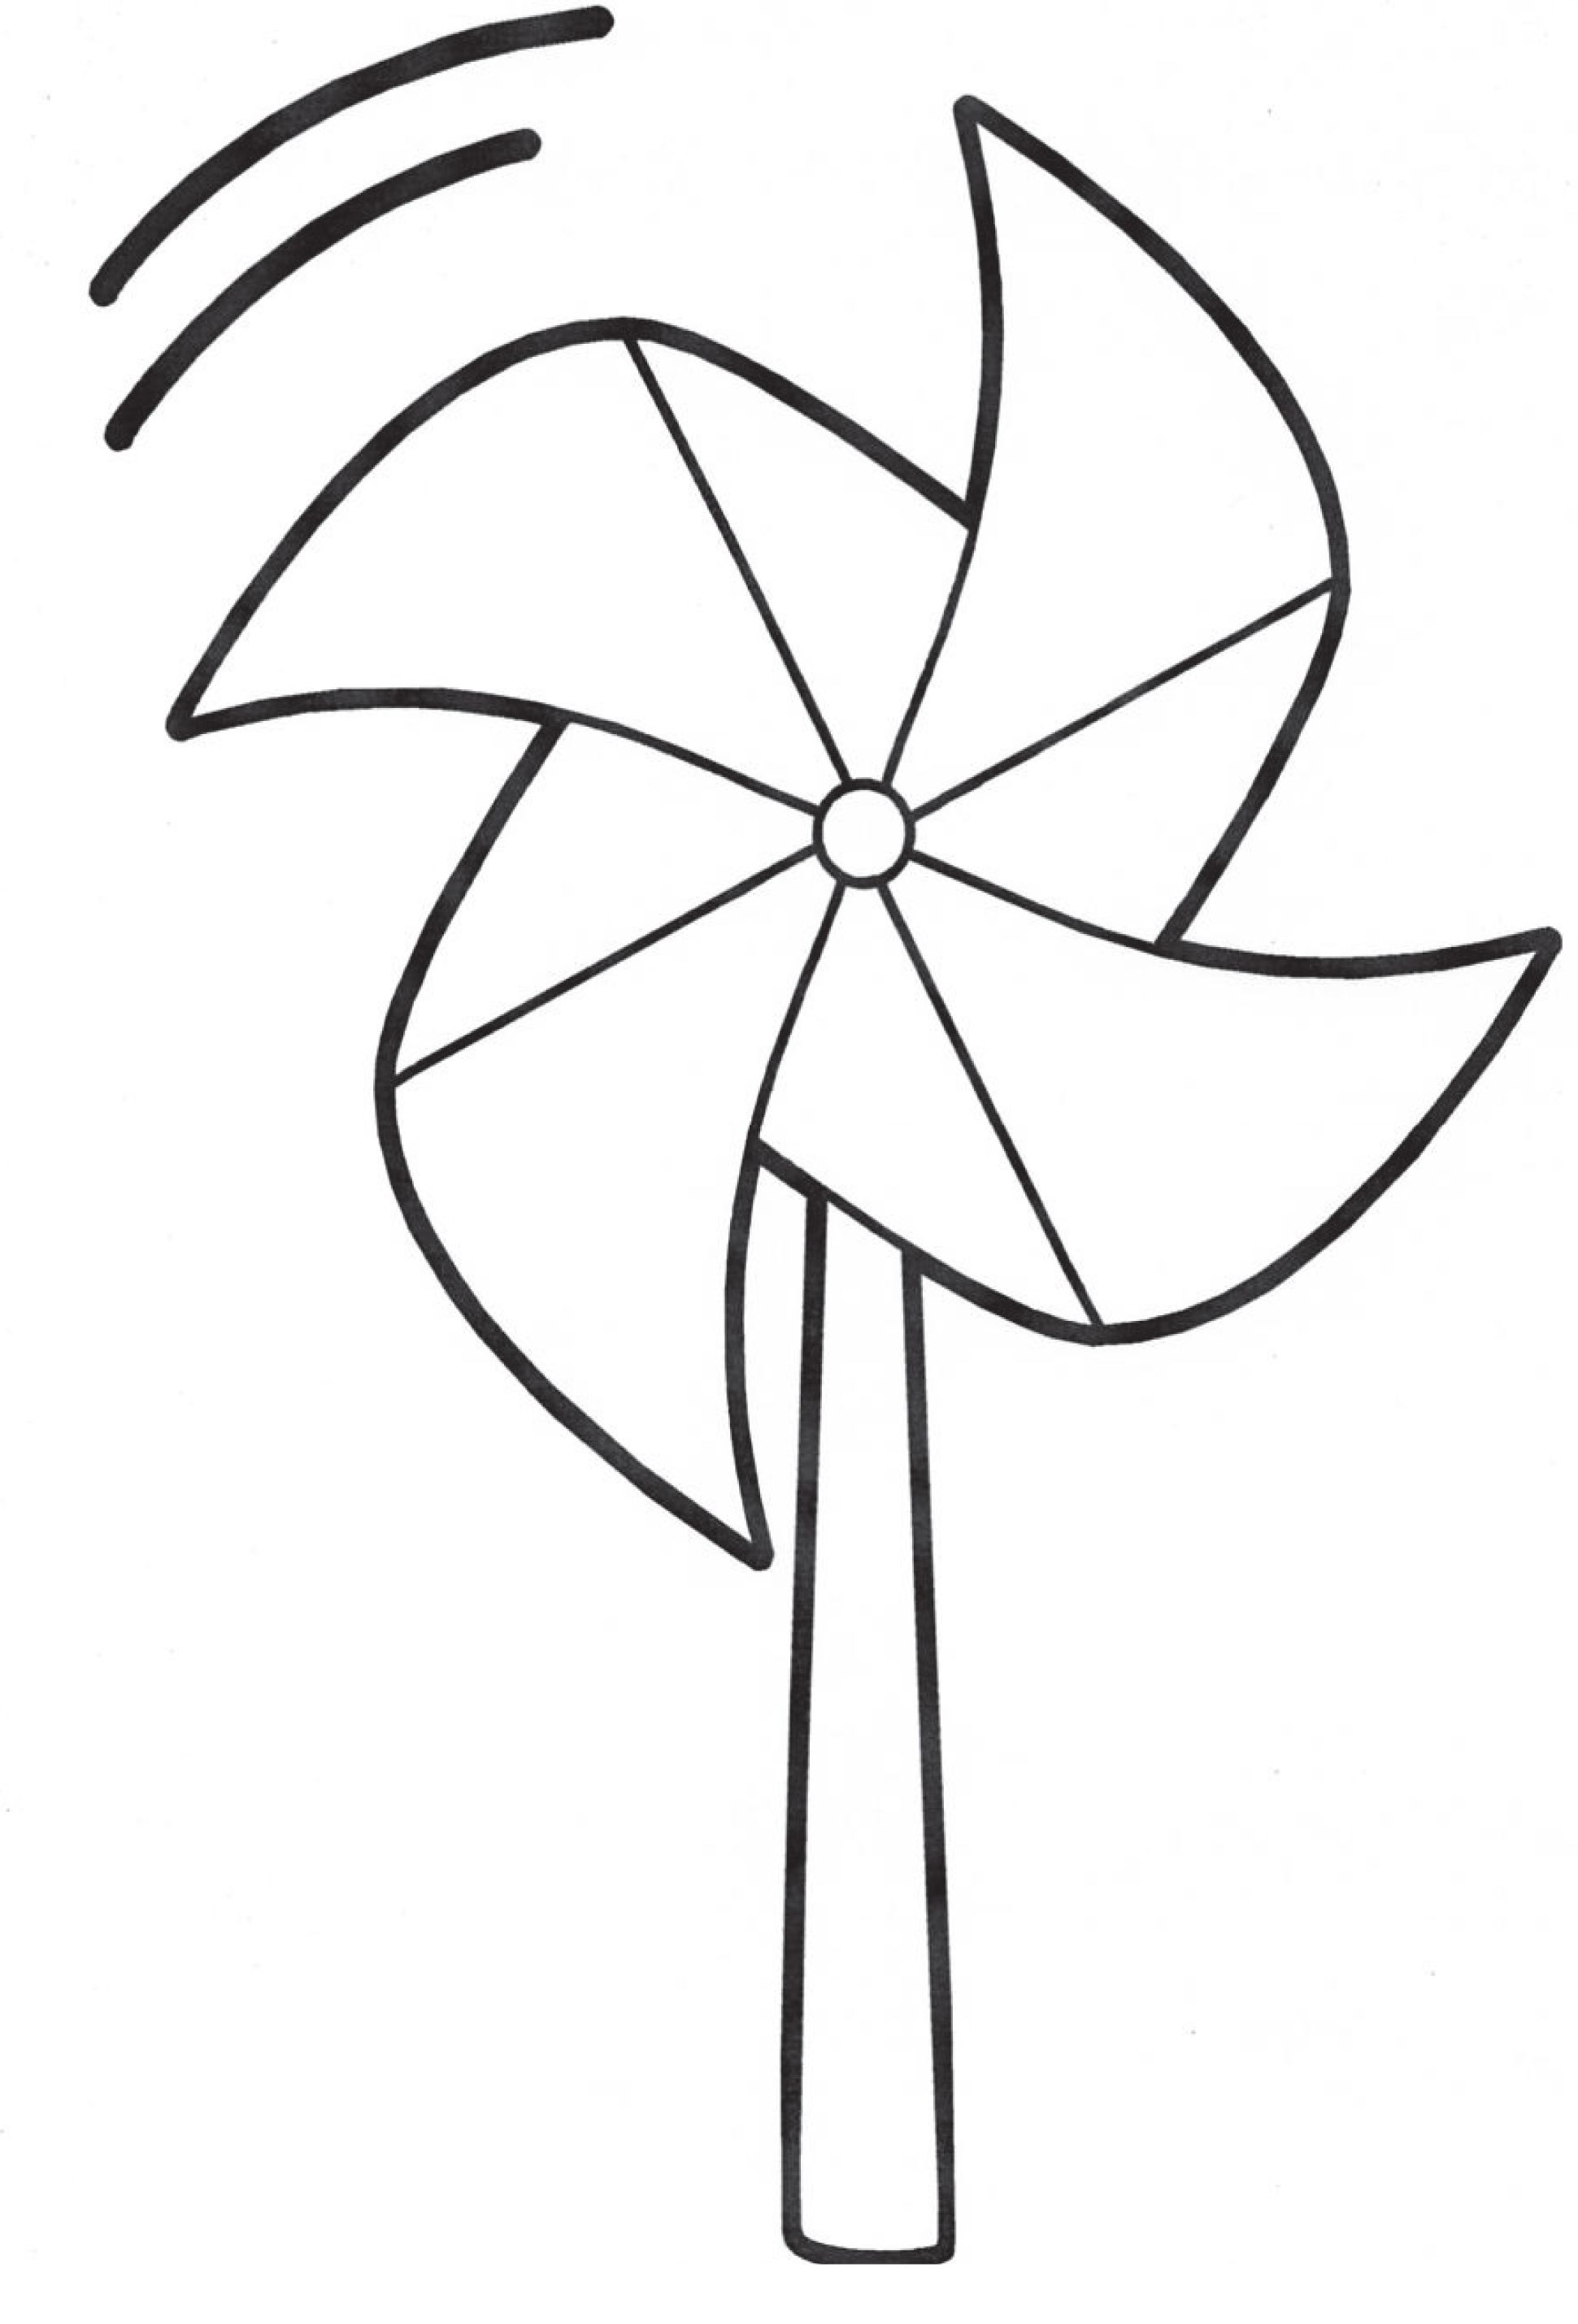 Color a pinwheel with your child. Support Prevent Child Abuse ...